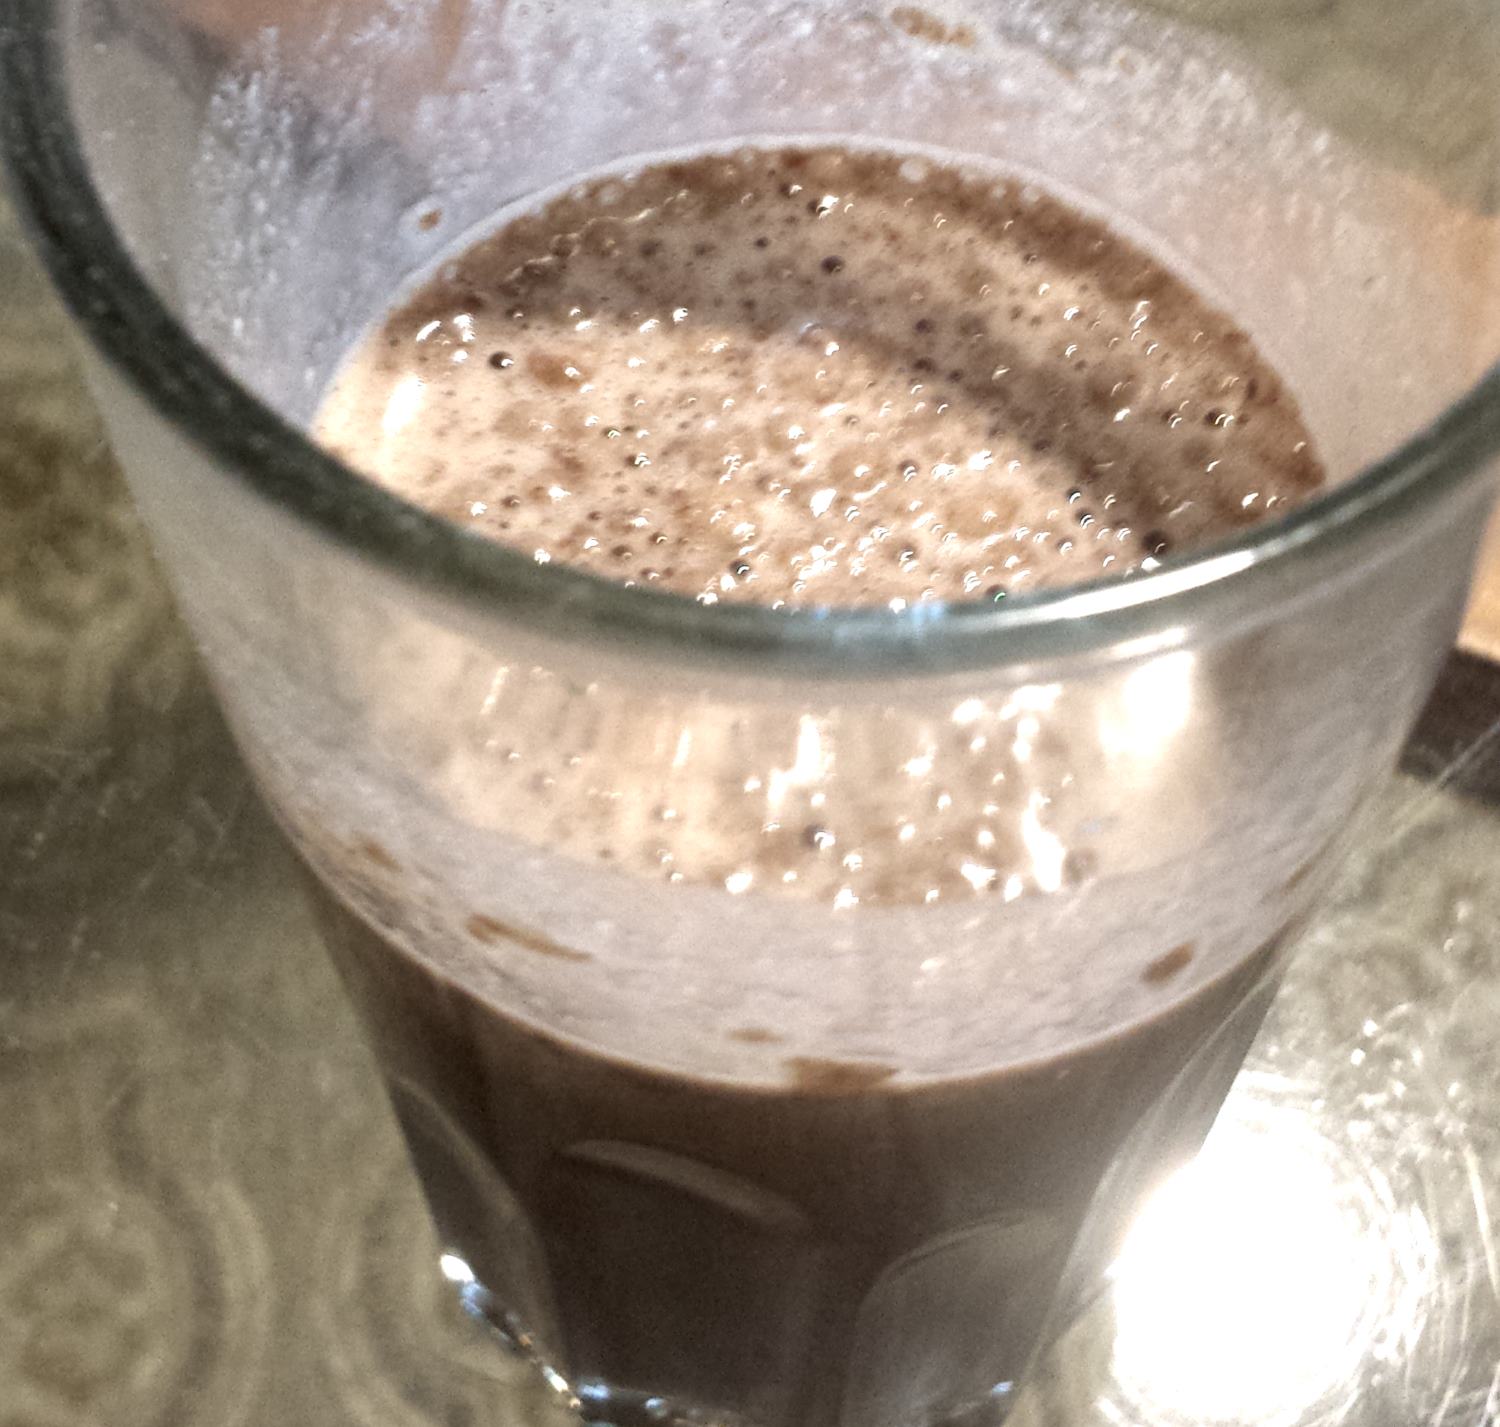 High in protein drink with creatine - Photo by popular fitness